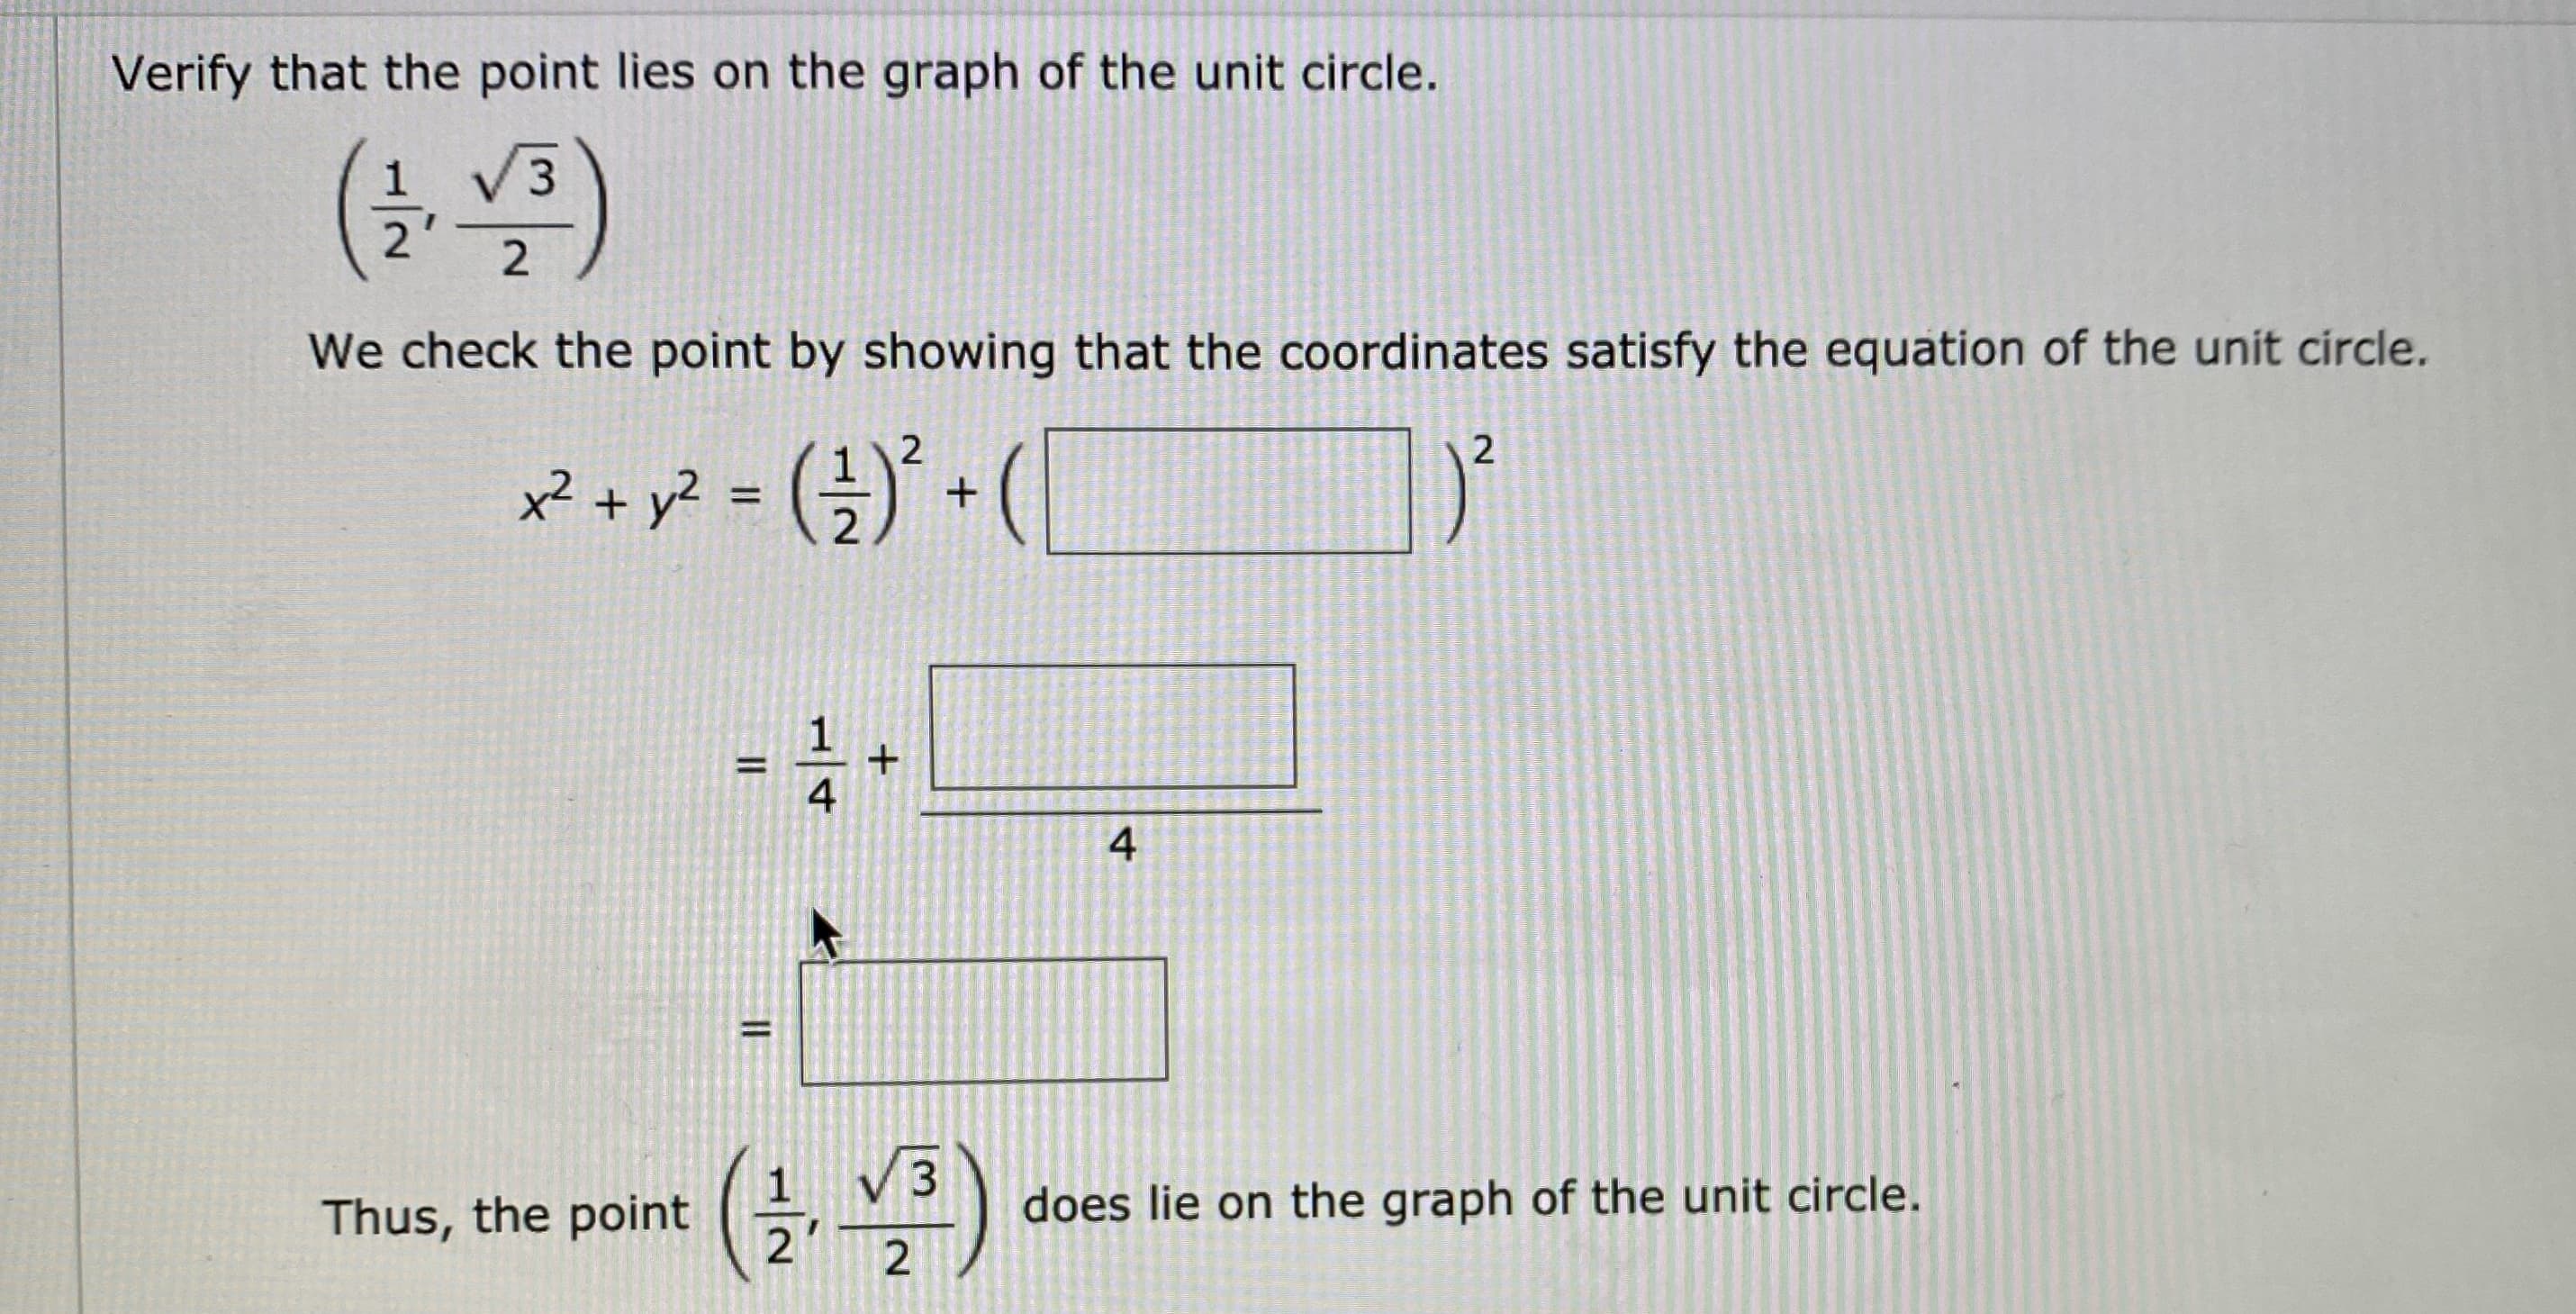 Verify that the point lies on the graph of the unit circle.
V3
